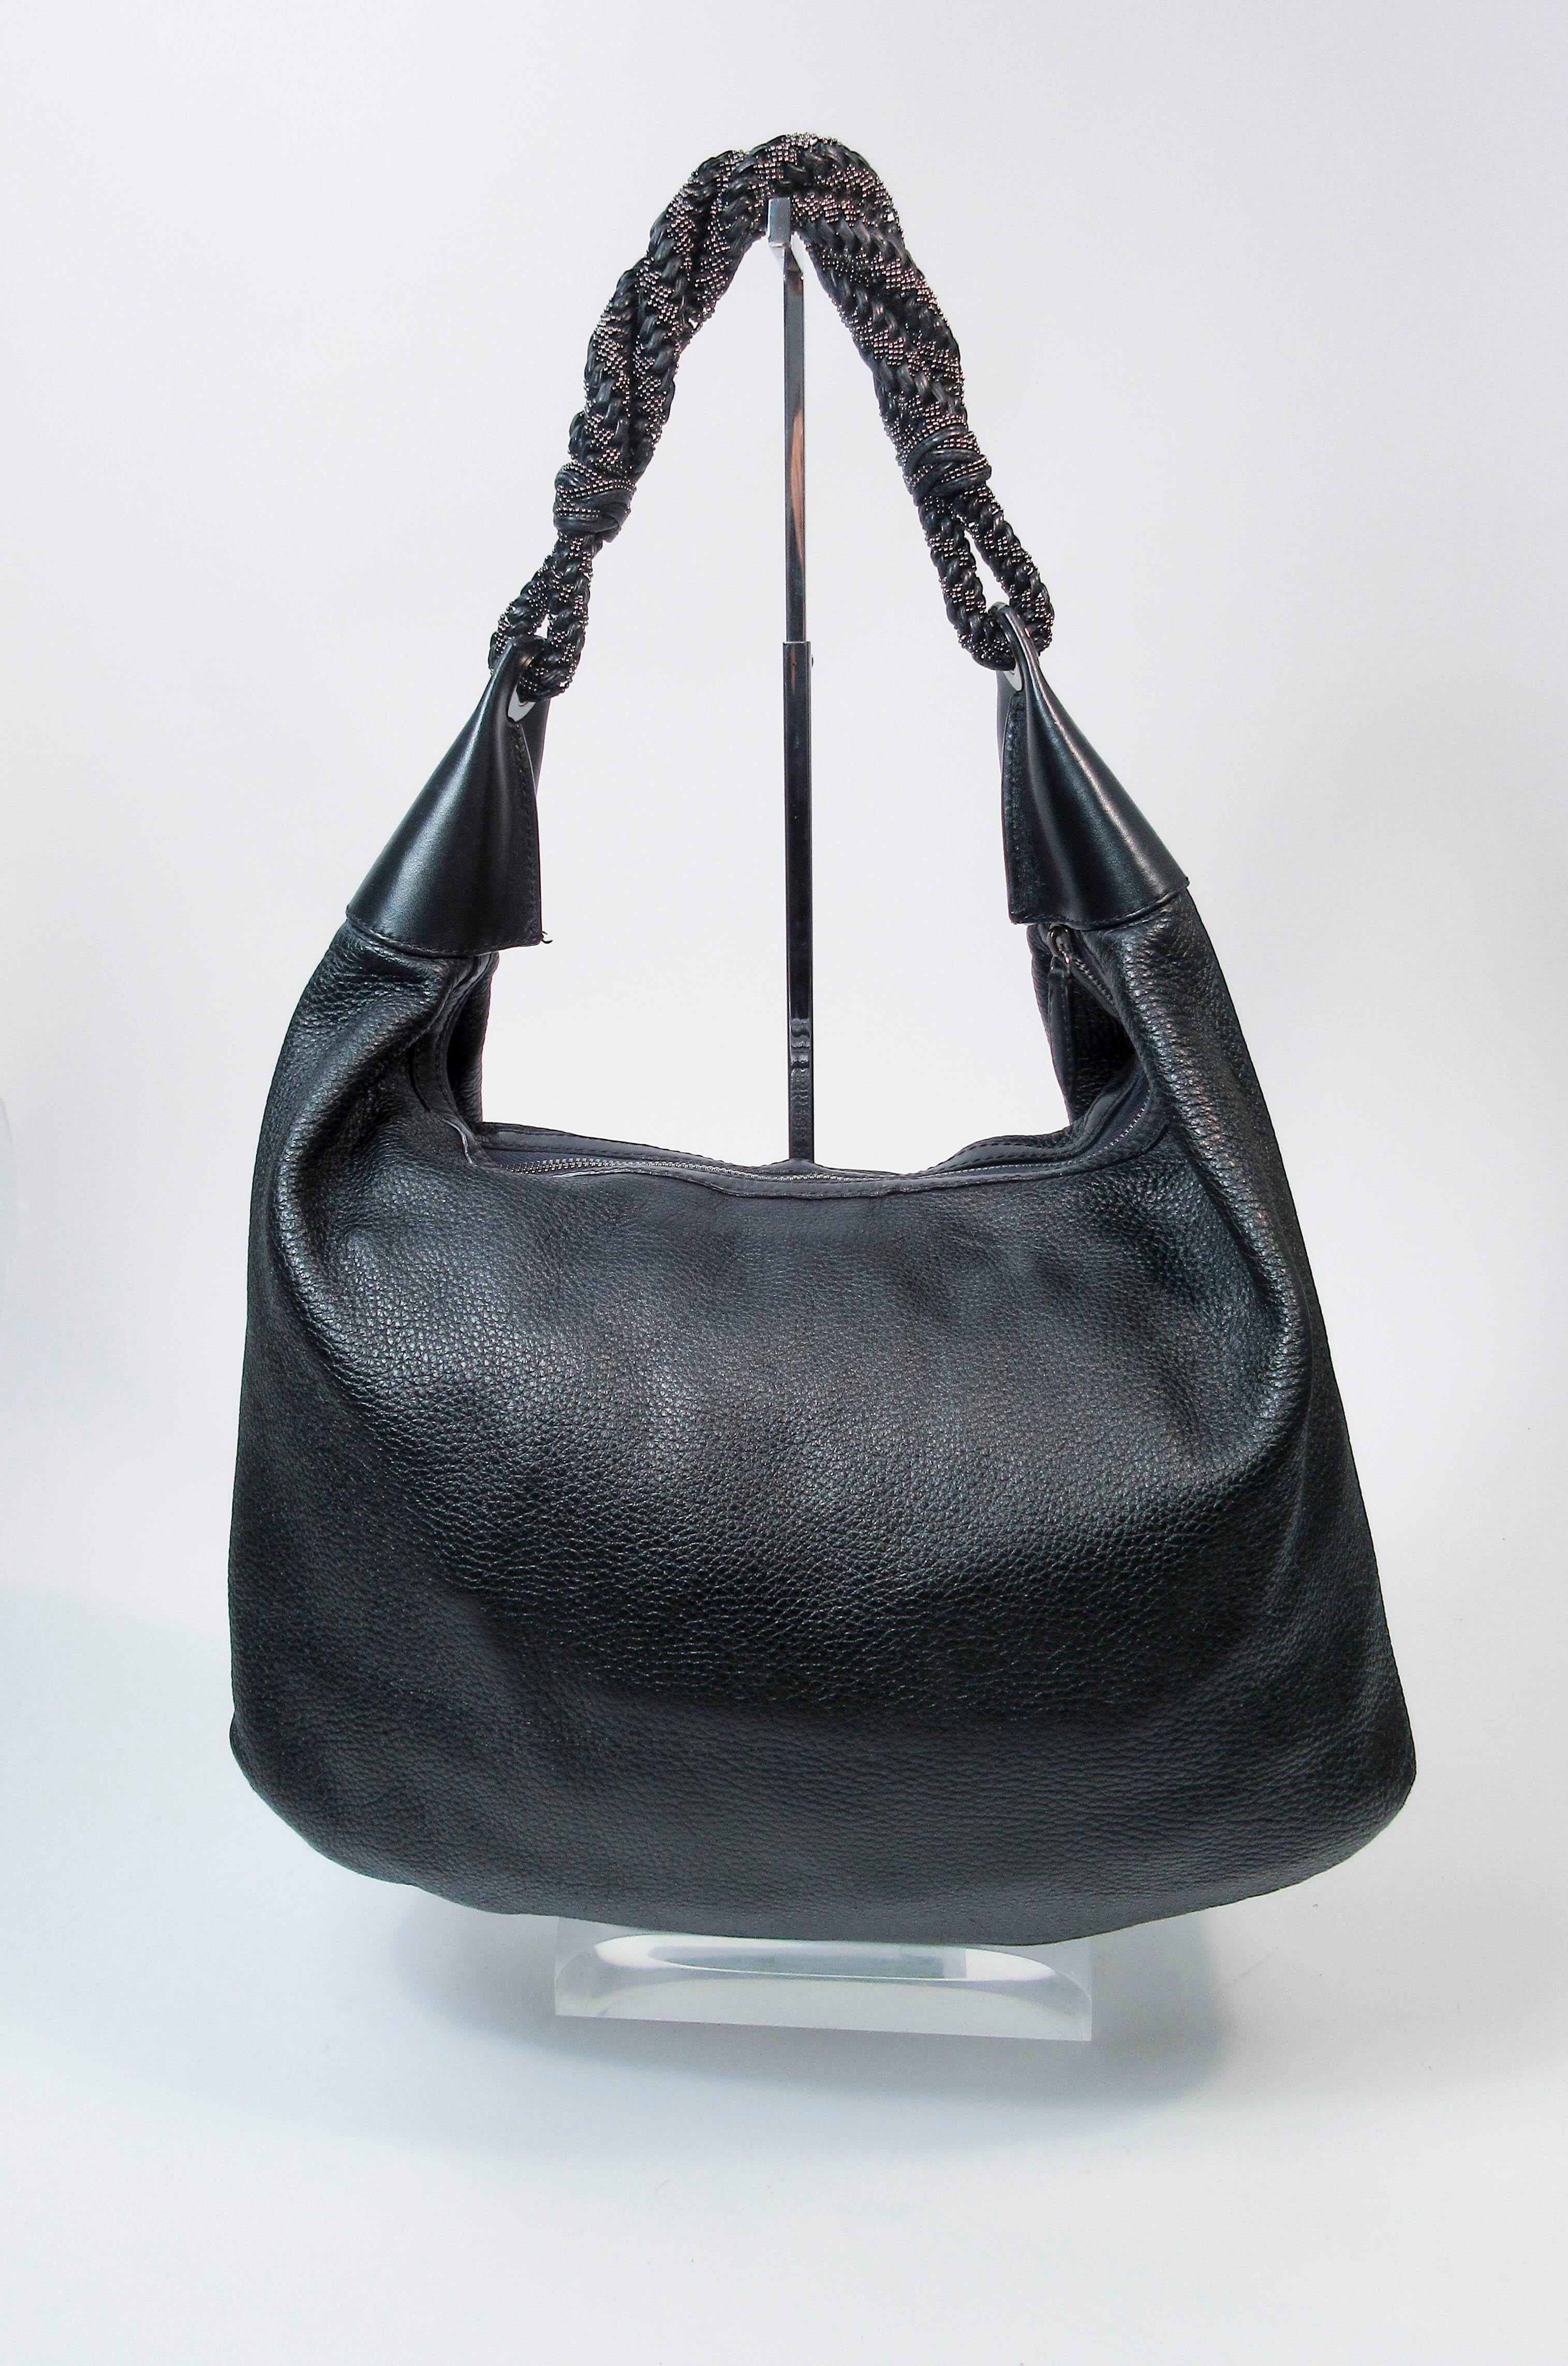 This Oscar De La Renta purse is composed of a beautiful Black leather. Features a hobo shape with a gorgeous beaded strap in black and gunmetal hues. There is an interior zipper pocket and comes with dustbag. In excellent pre-owned condition (some